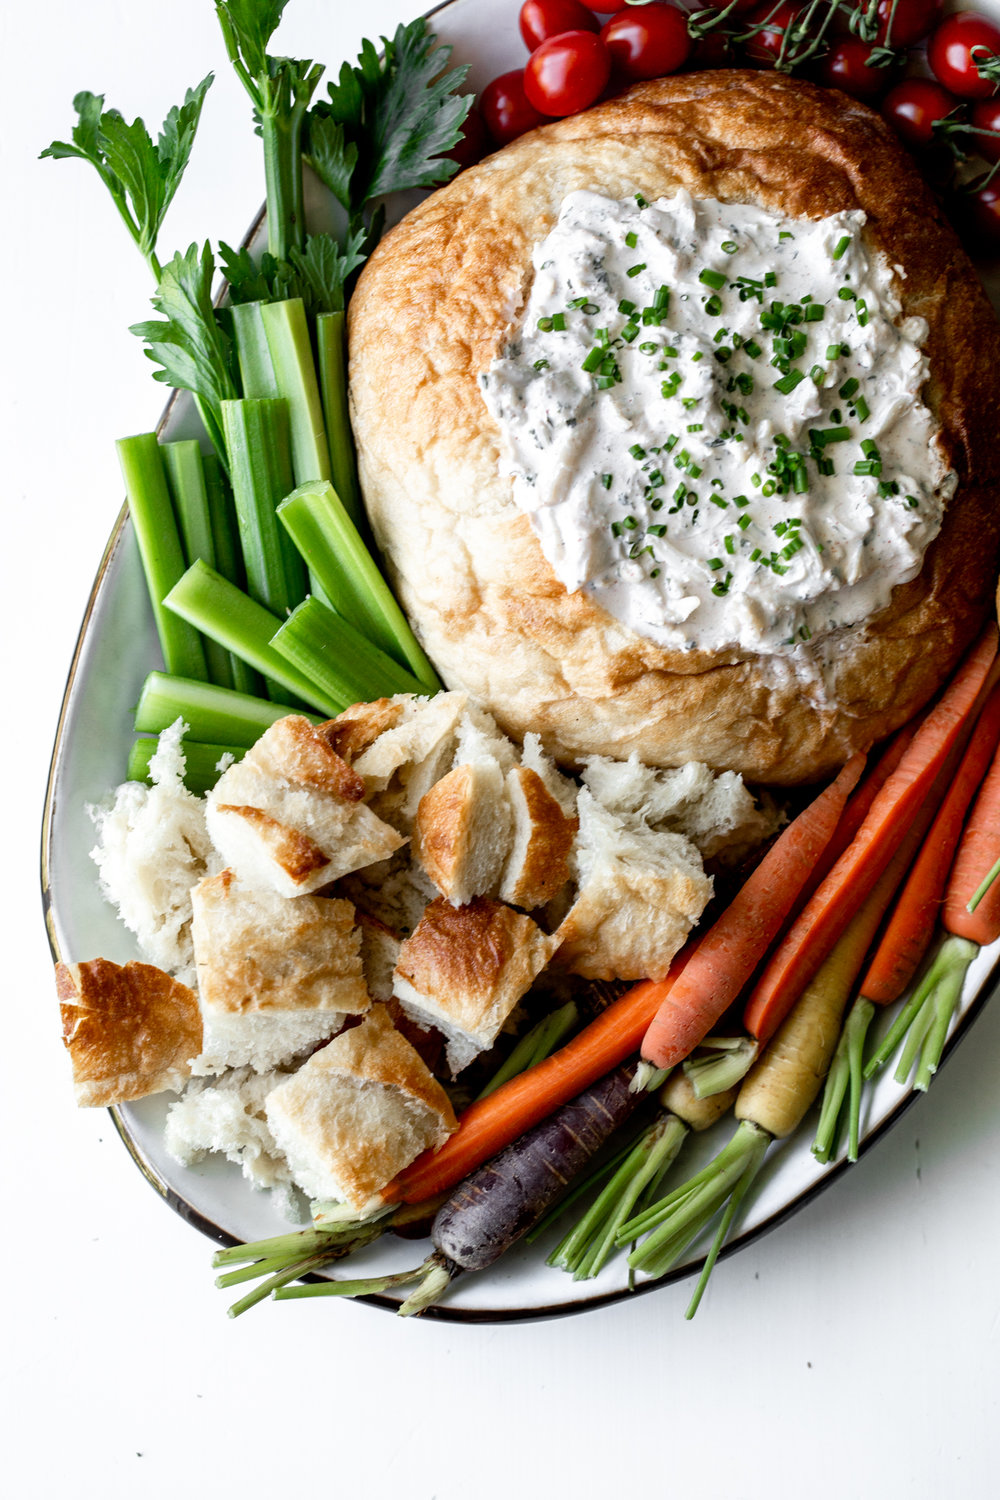 chilled easy crab dip recipe served in a bread bowl